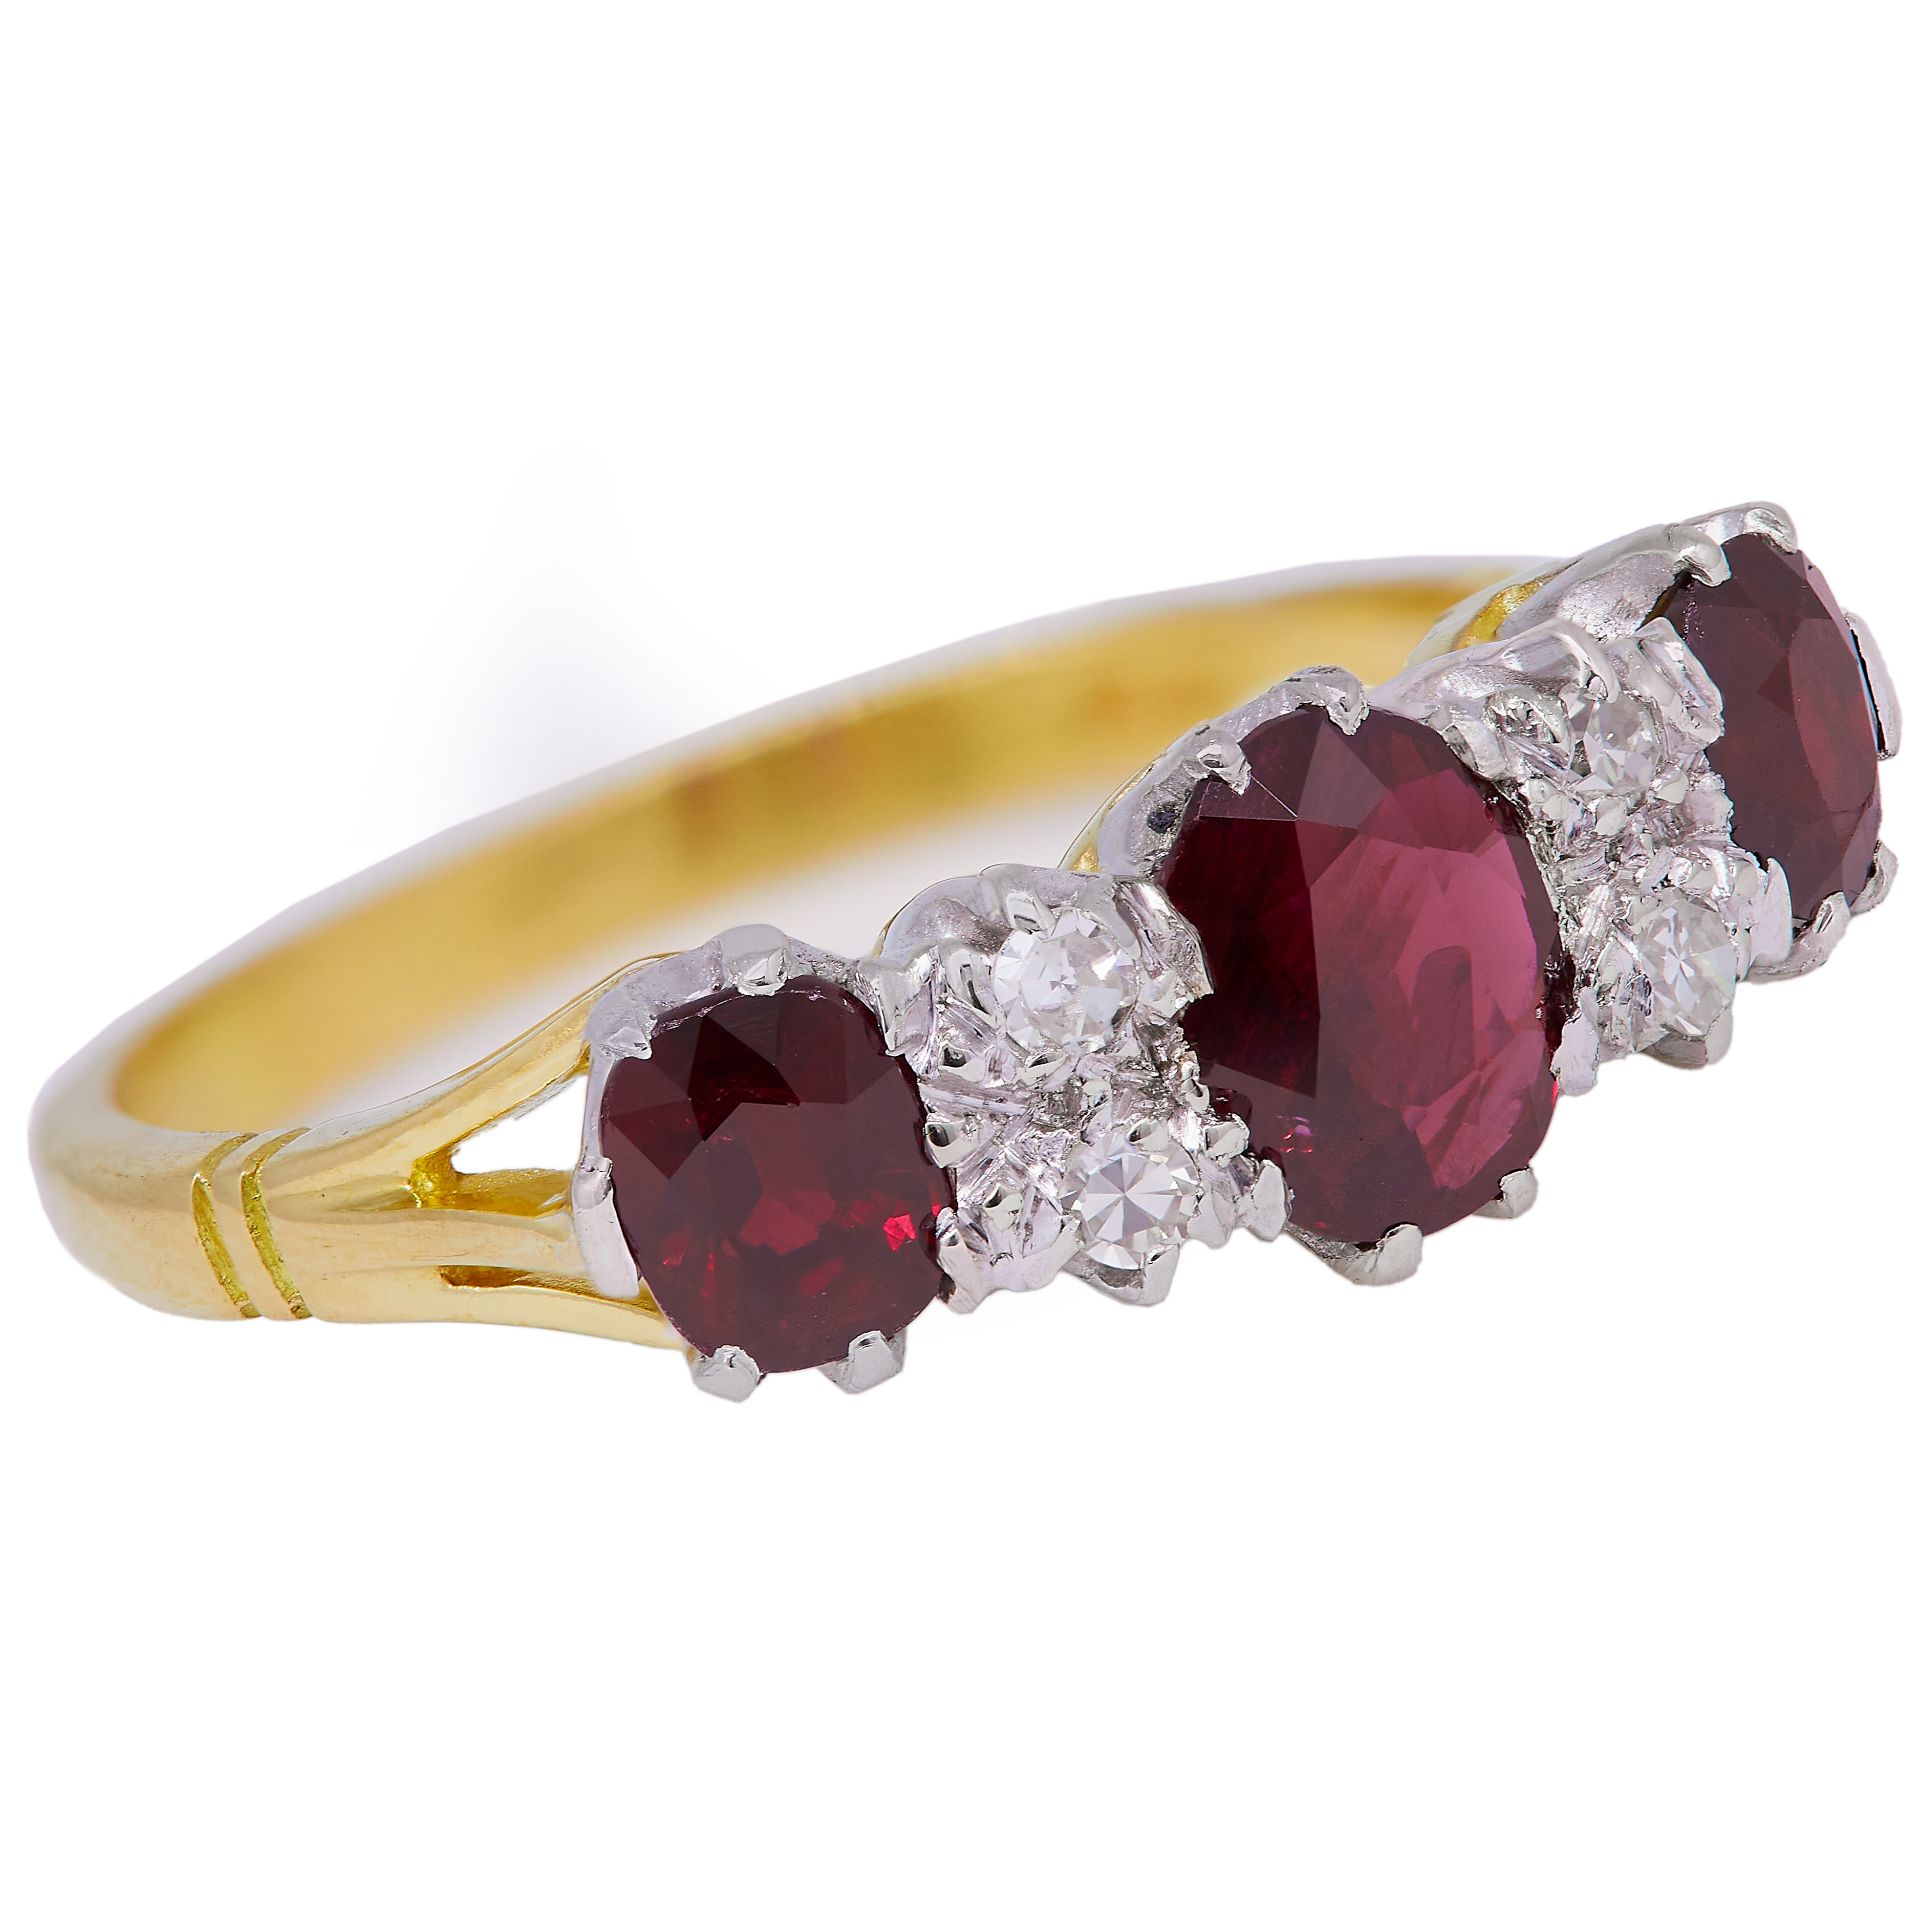 -NO RESERVE- RUBY AND DIAMOND RING